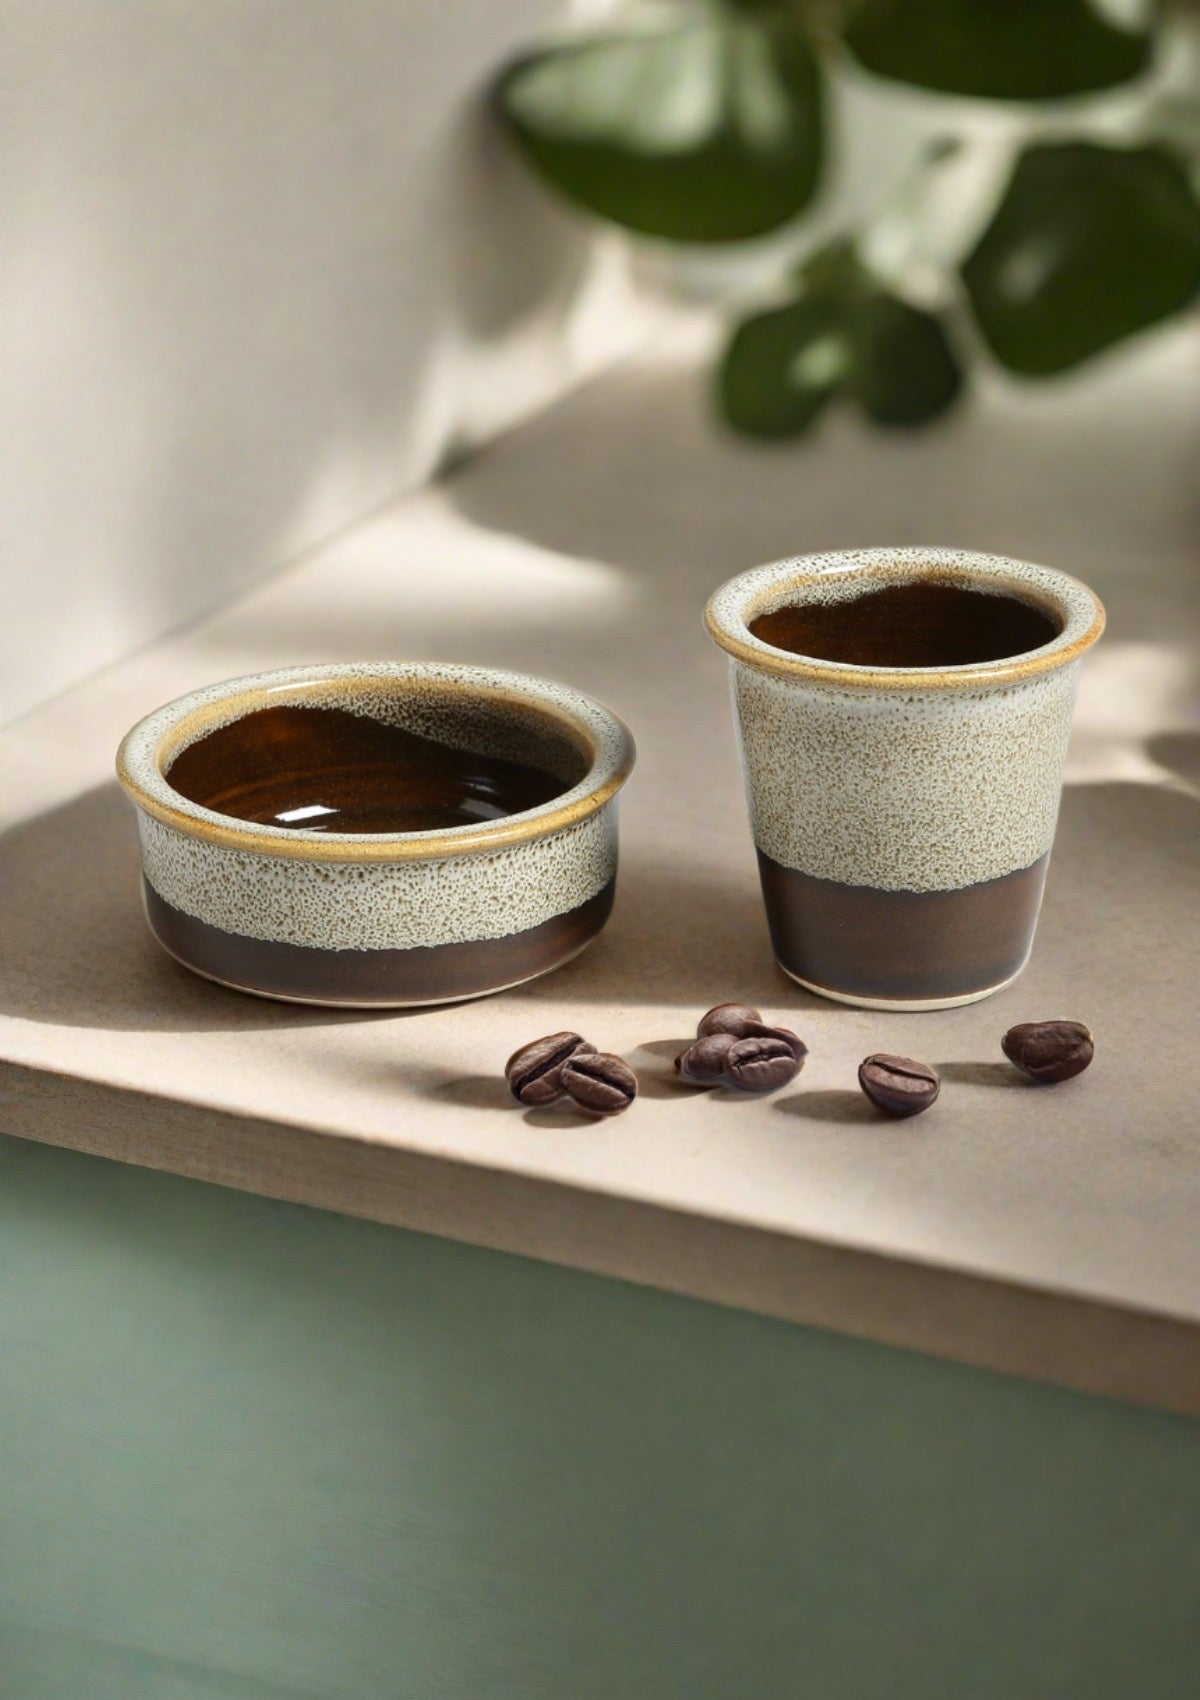 Filter coffee set of 2- Cream and brown